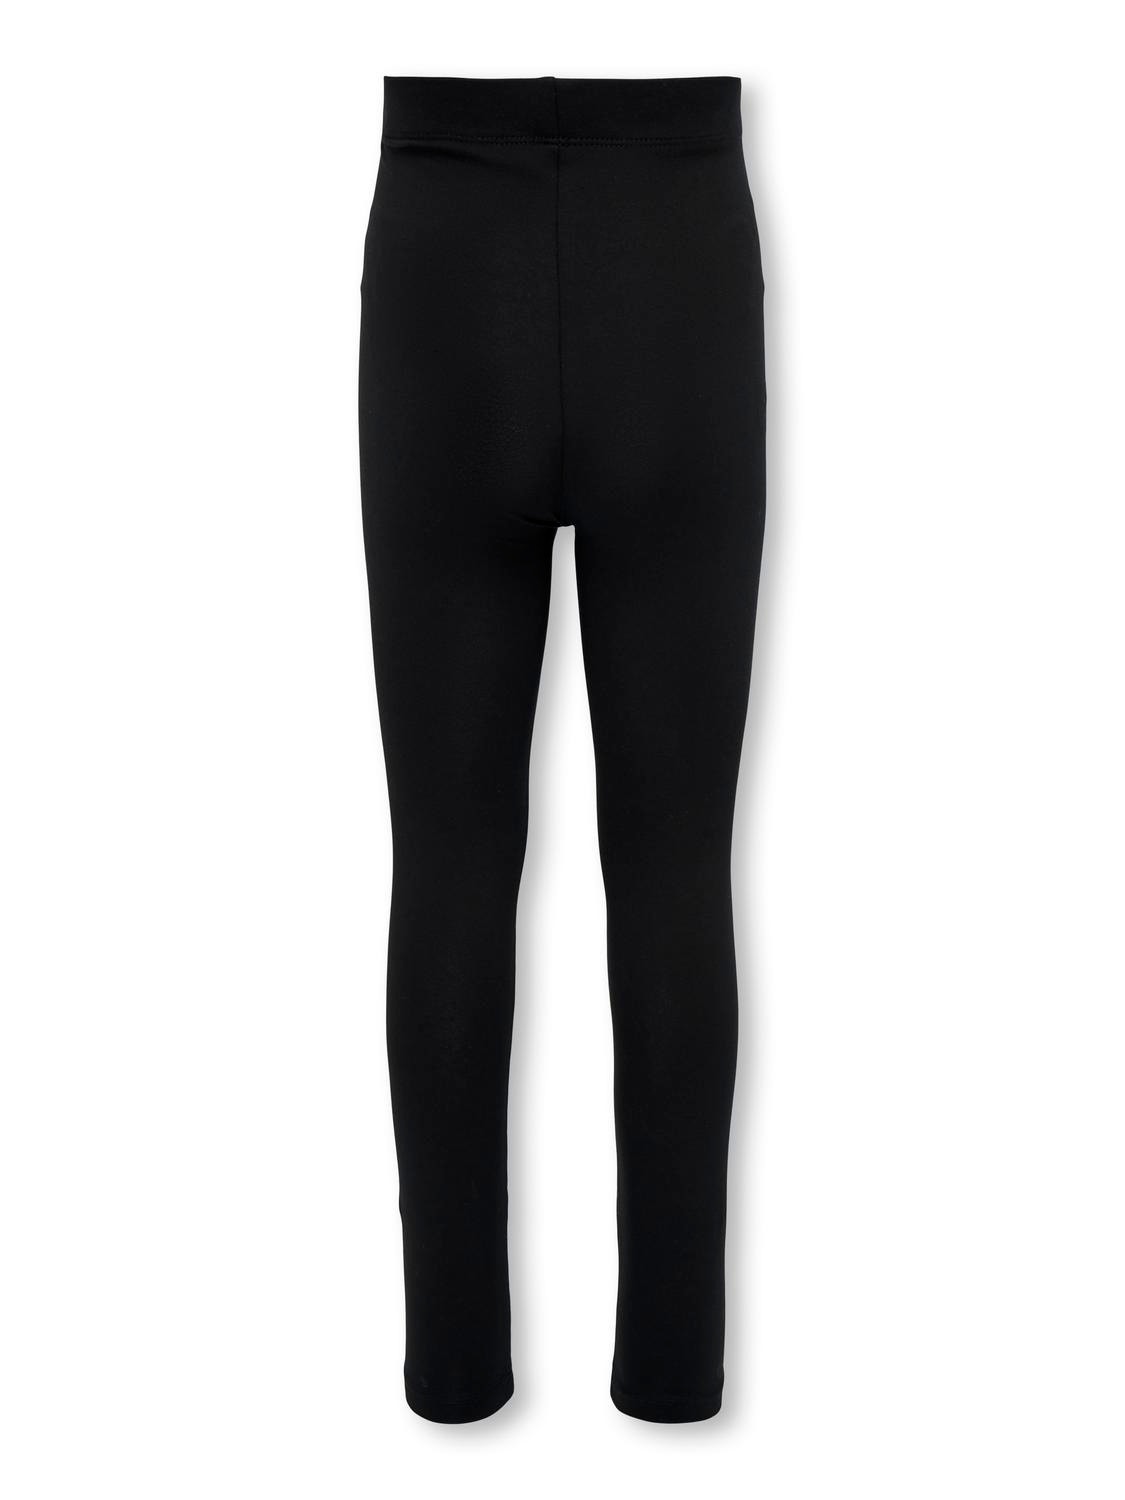 ONLY Tight Fit Leggings -Black - 15303591